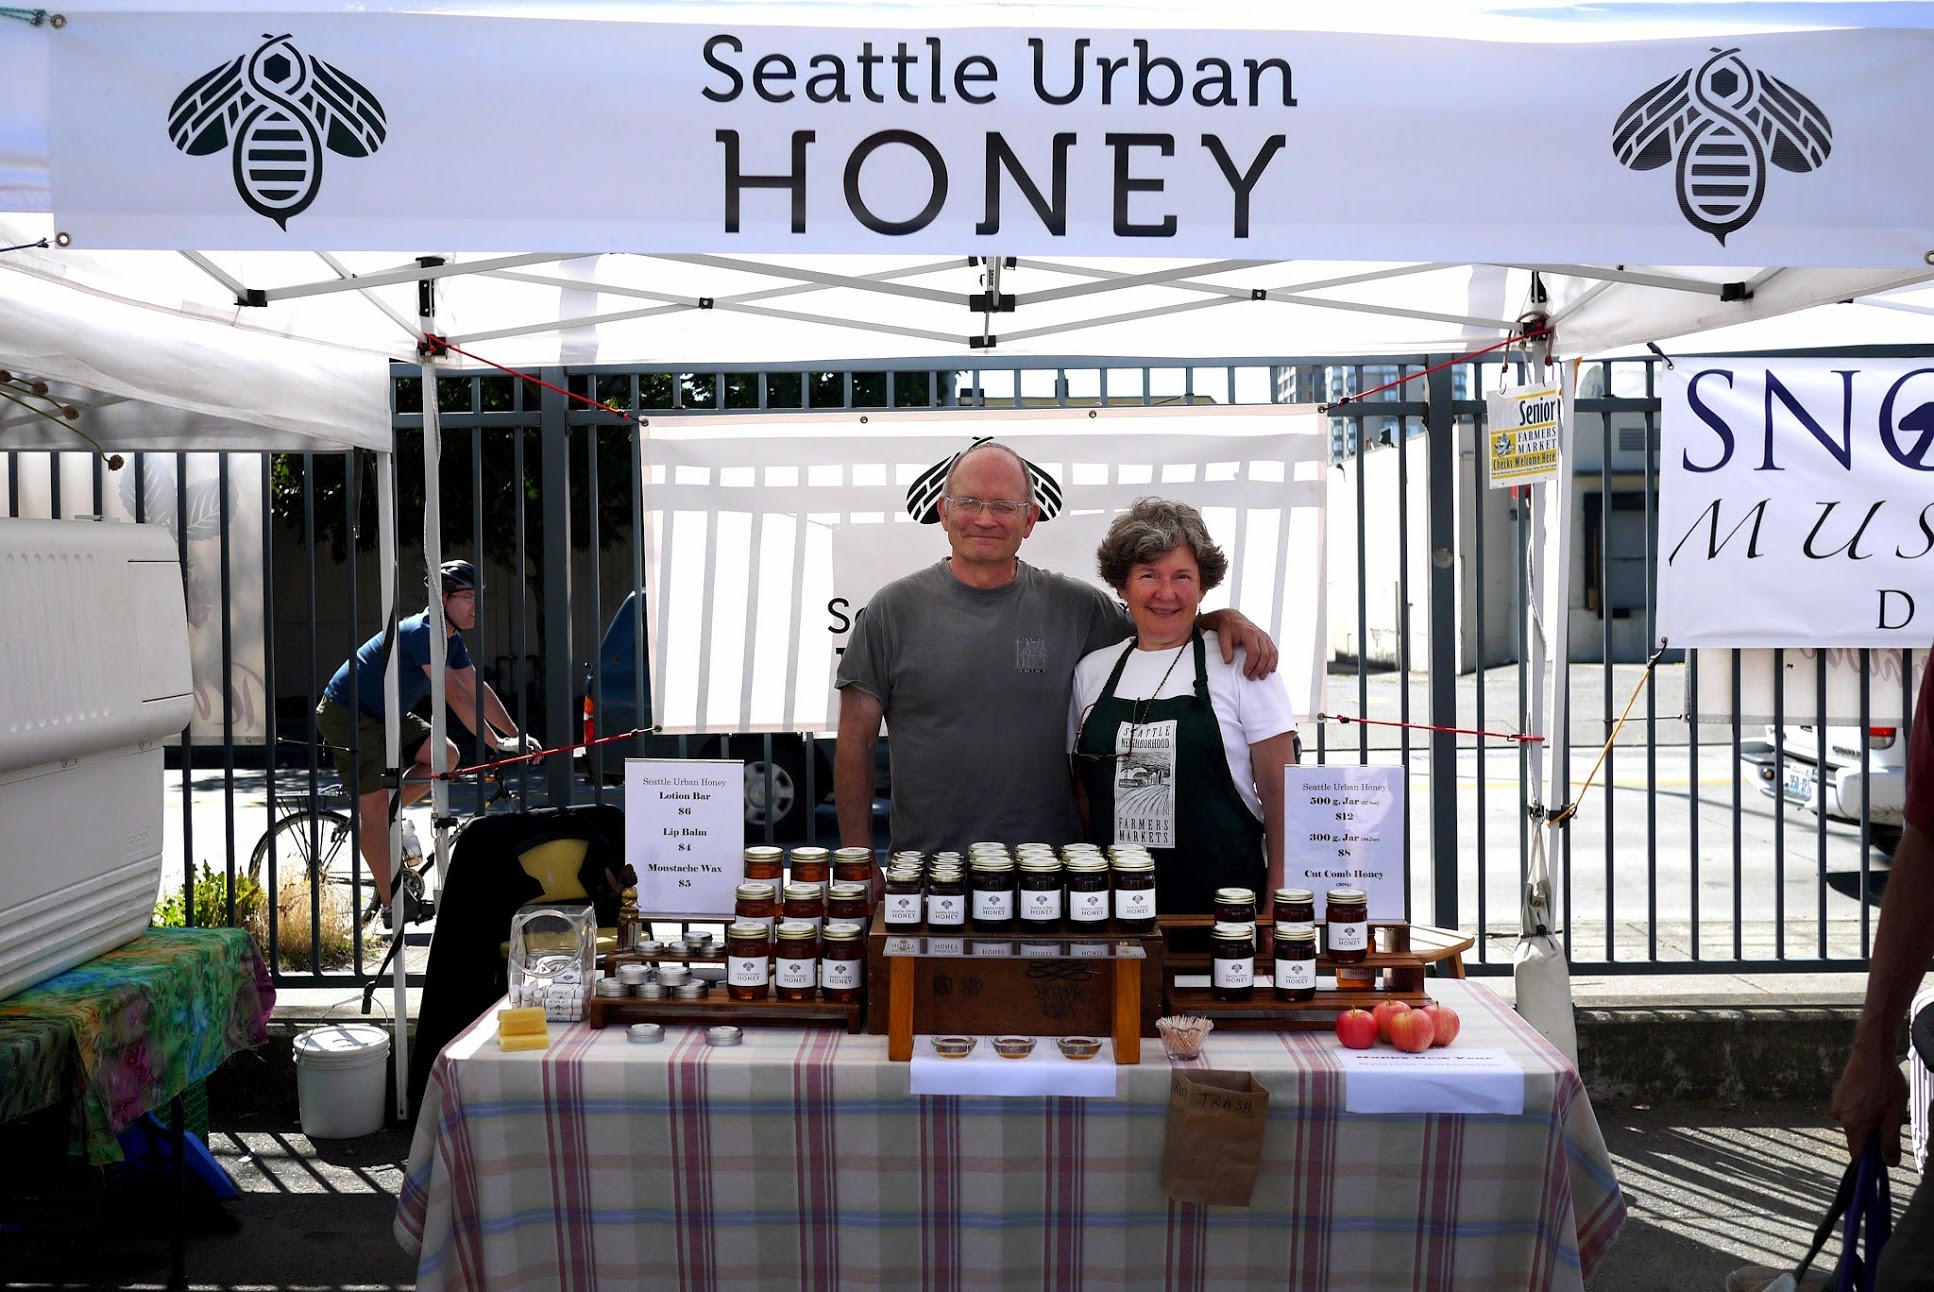 Seattle Urban Honey in the News